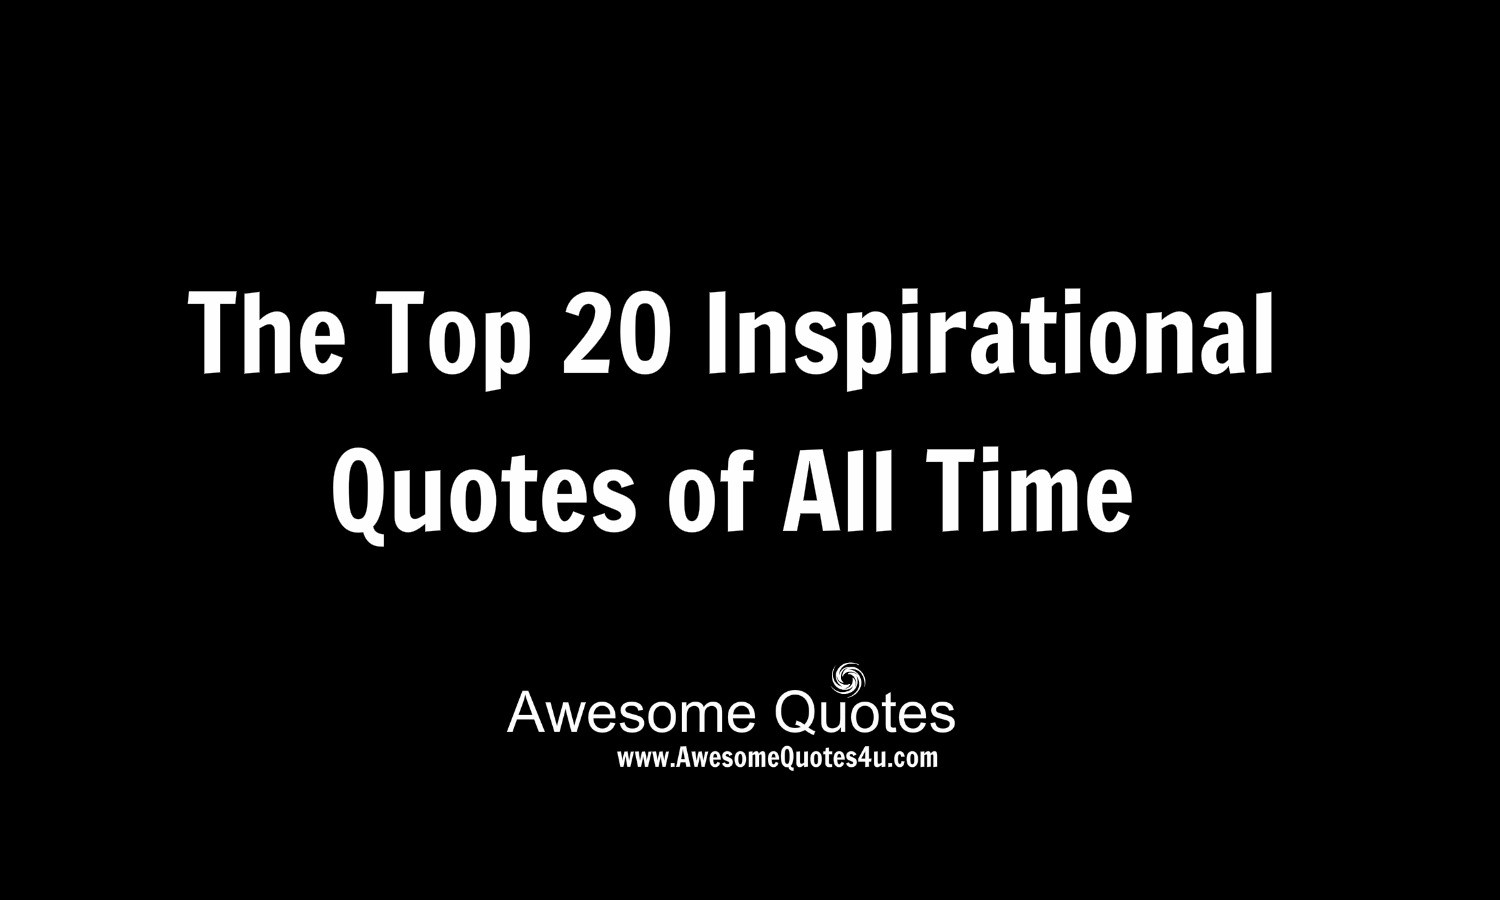 Best Inspirational Quotes Of All Time
 Awesome Quotes The Top 20 Inspirational Quotes of All Time